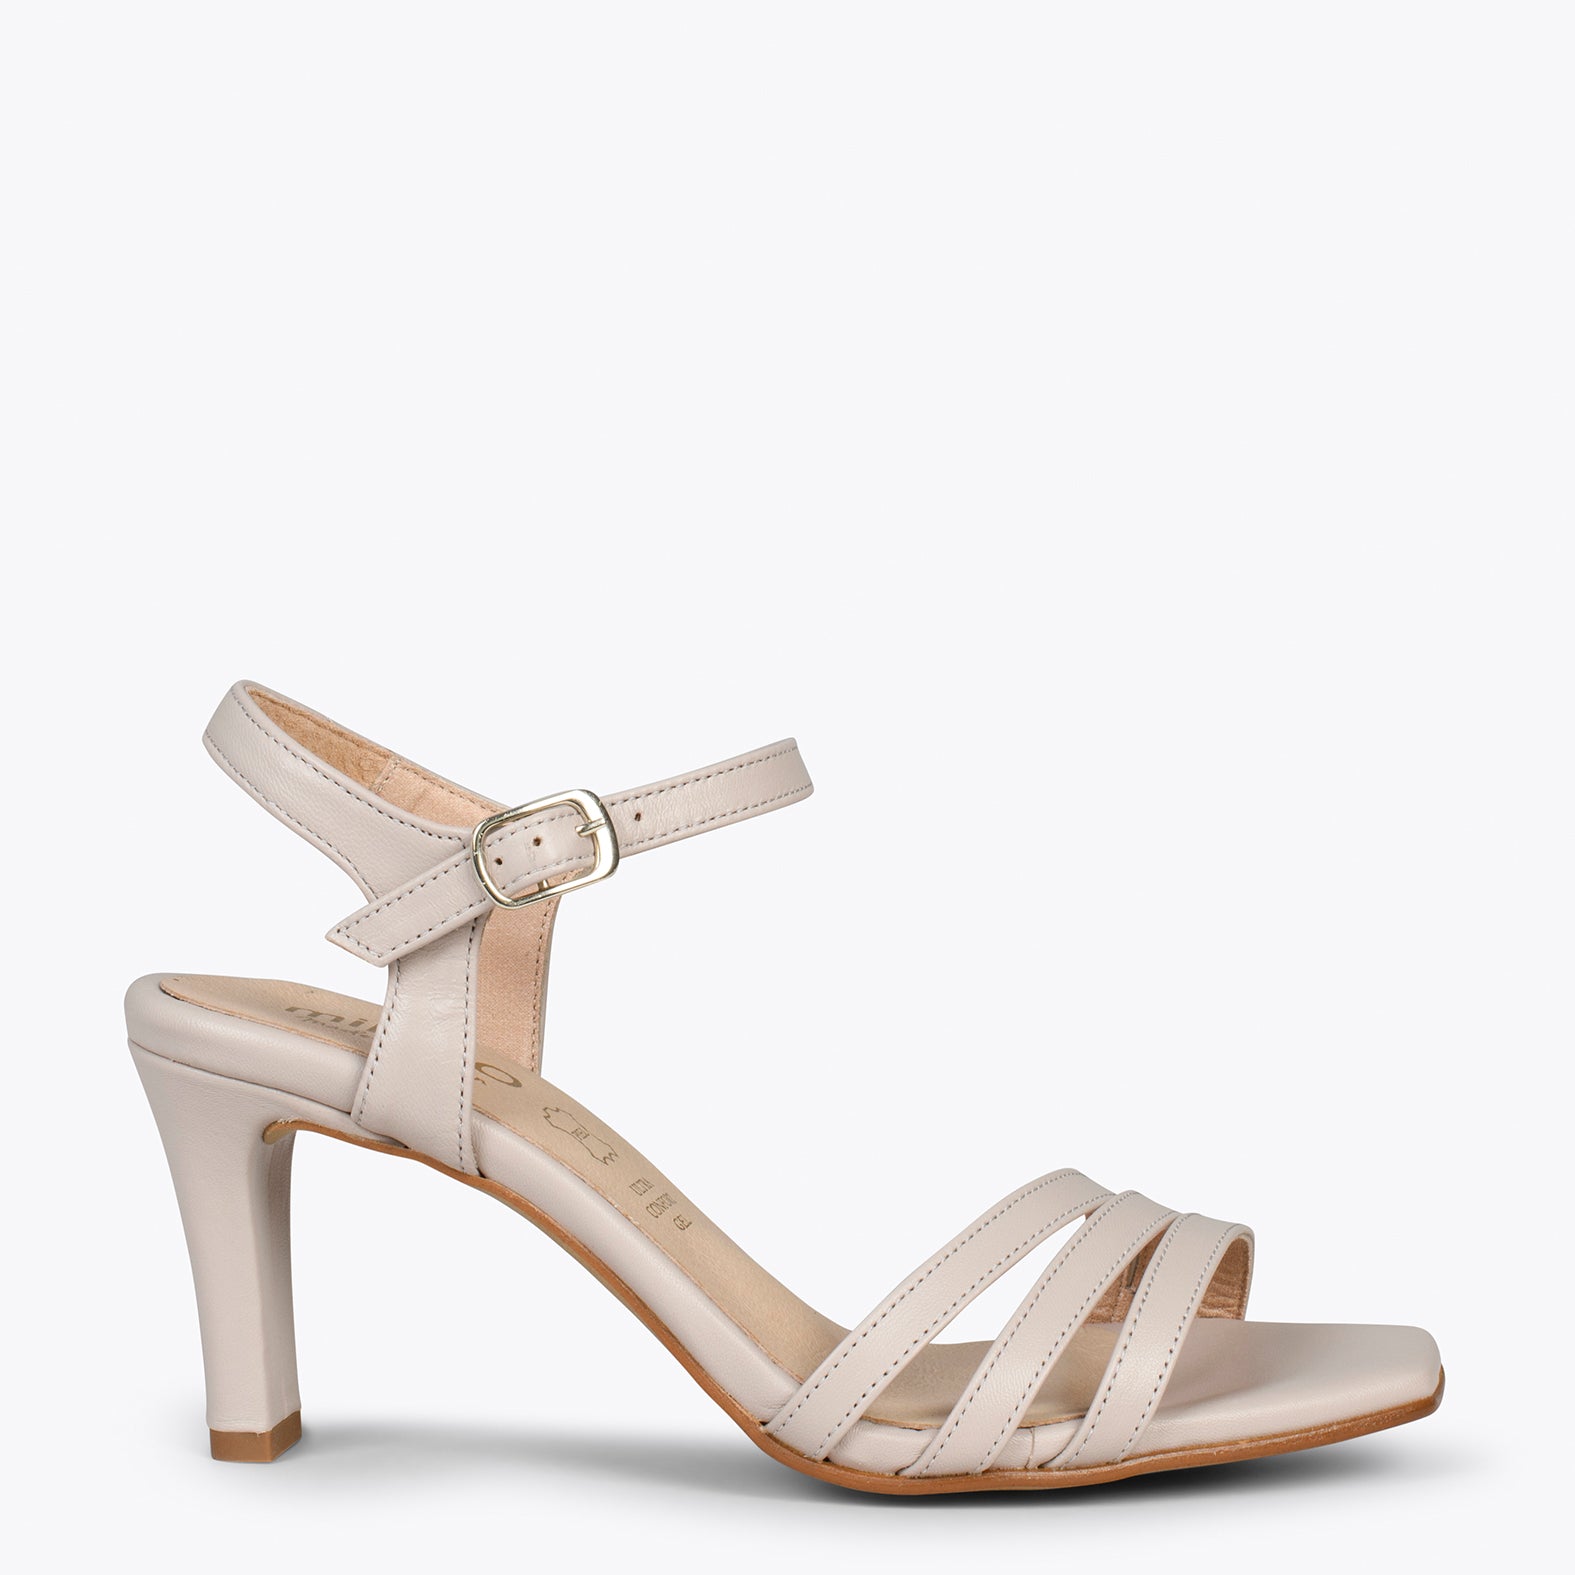 CANNES – TAUPE strap high heel sandal